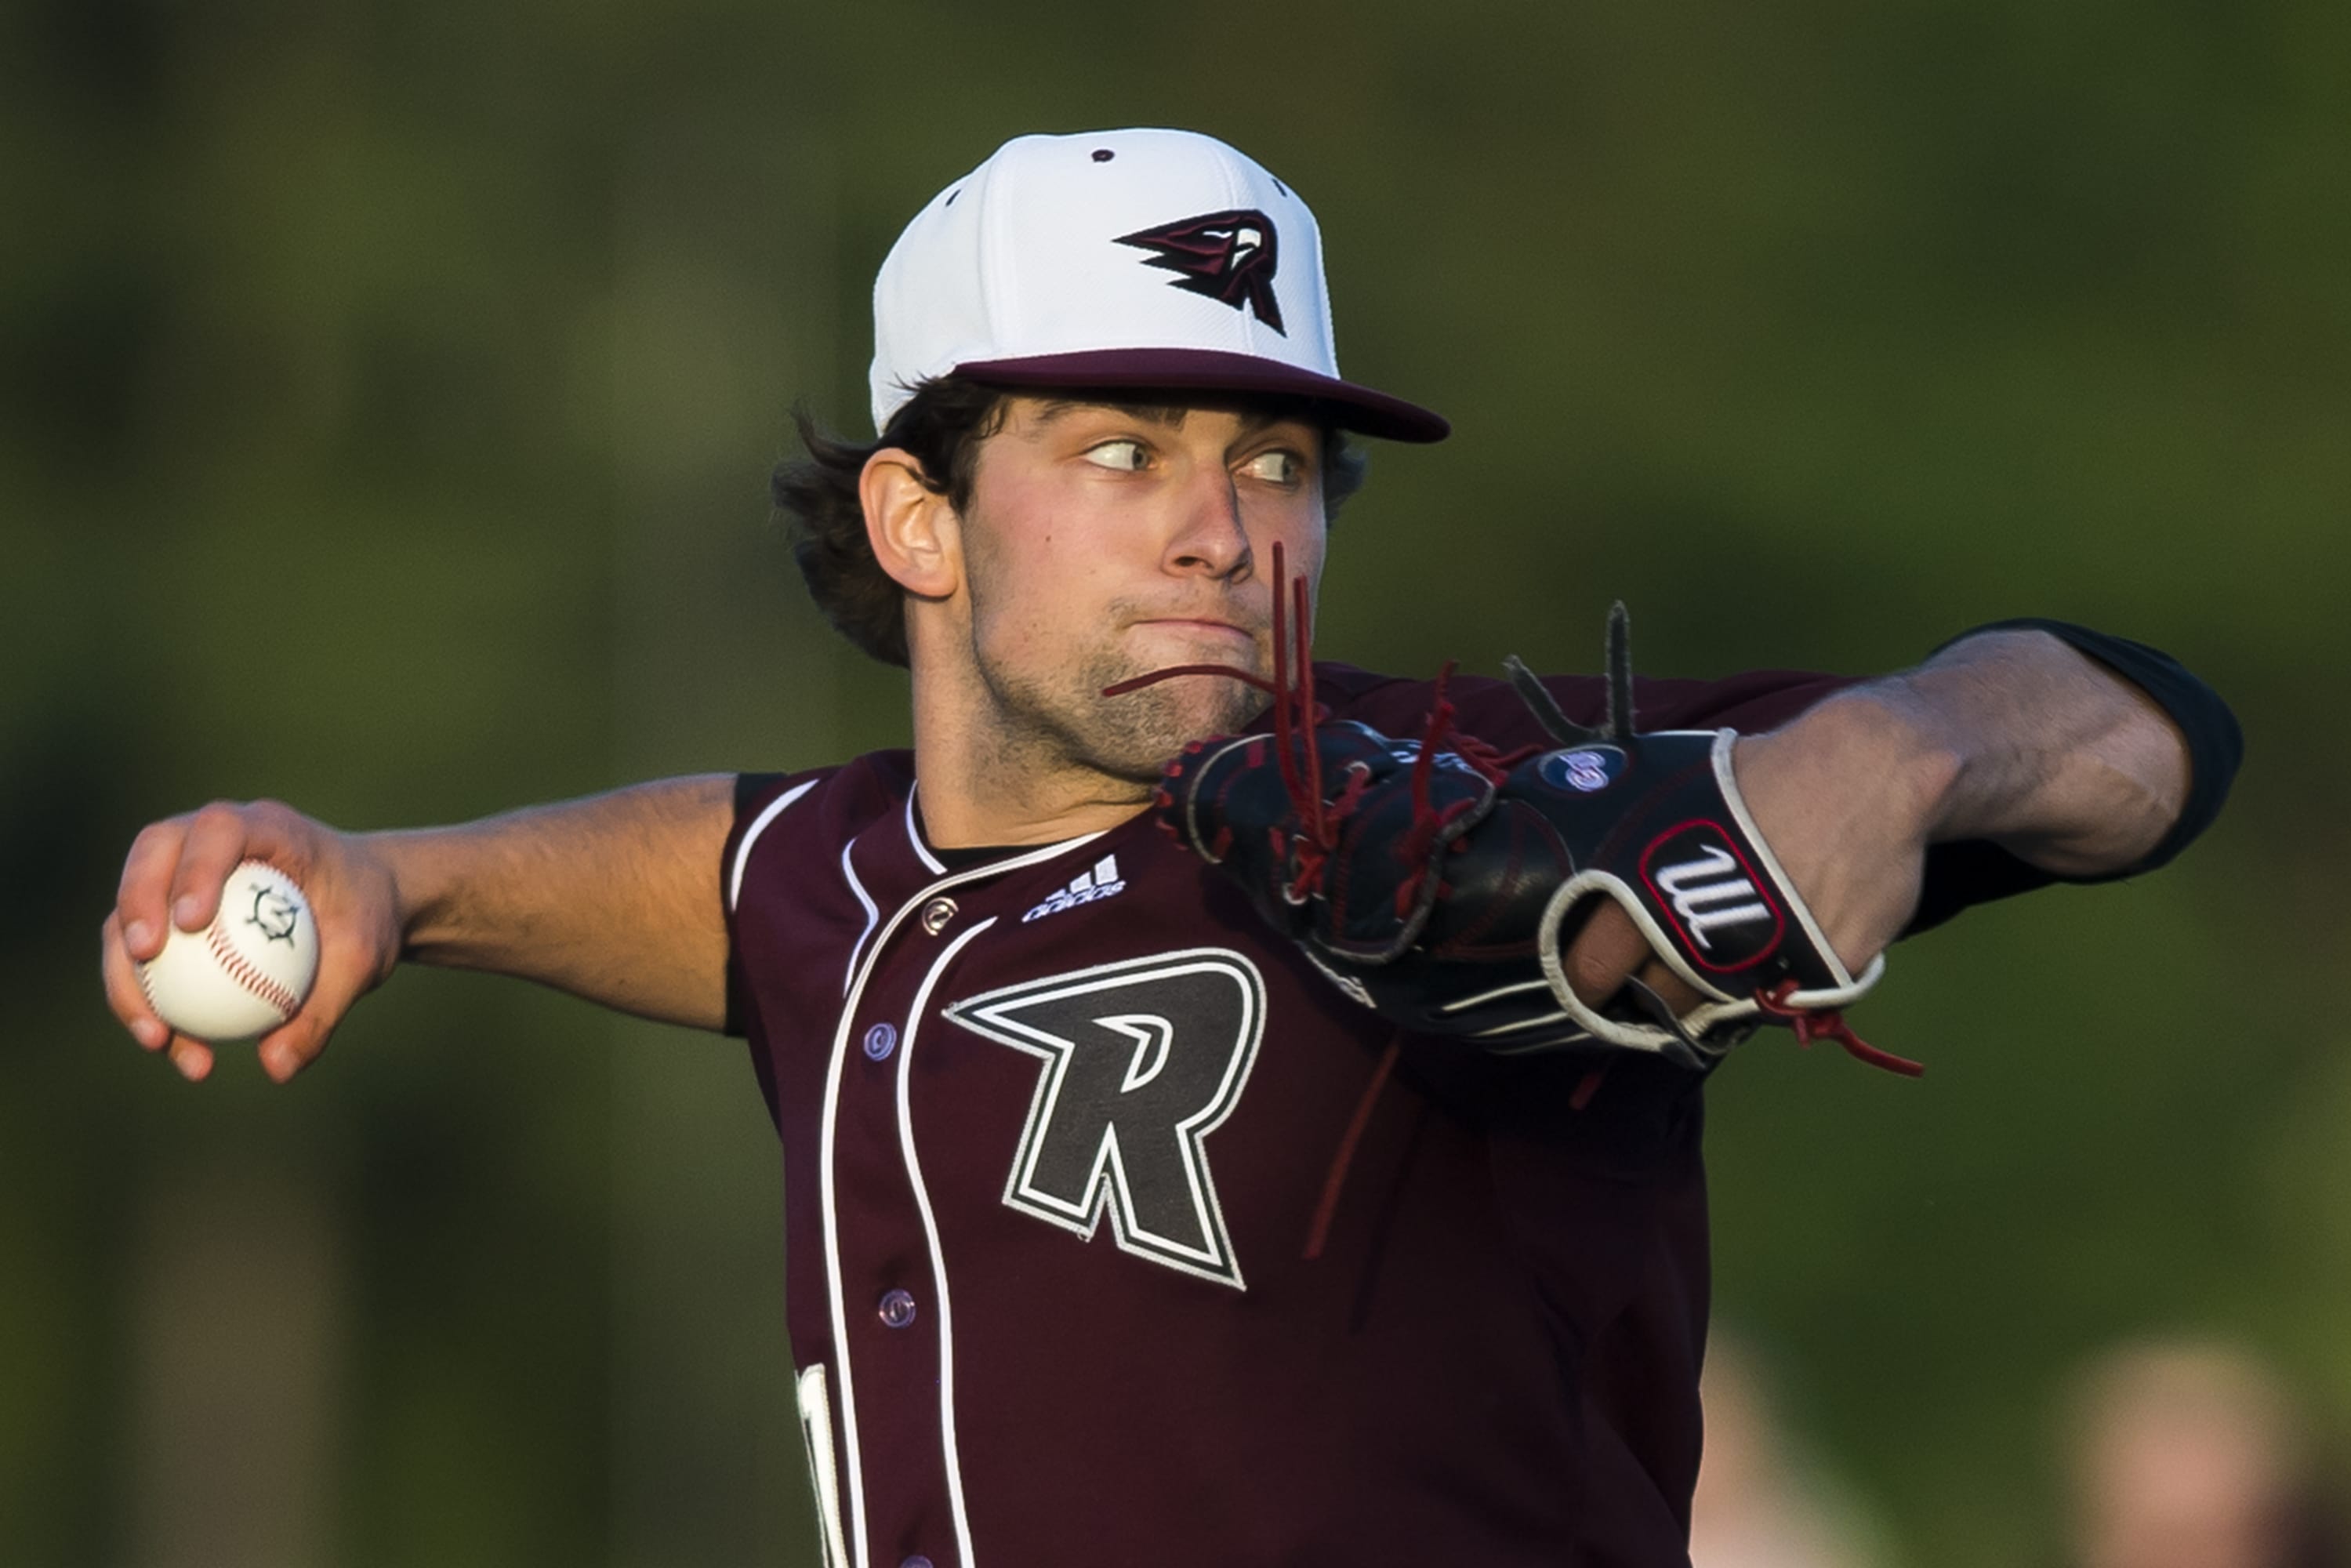 Ridgefield's Michael Spellacy pitches against Yakima at the Ridgefield Outdoor Recreation Center on Tuesday night, June 4, 2019.